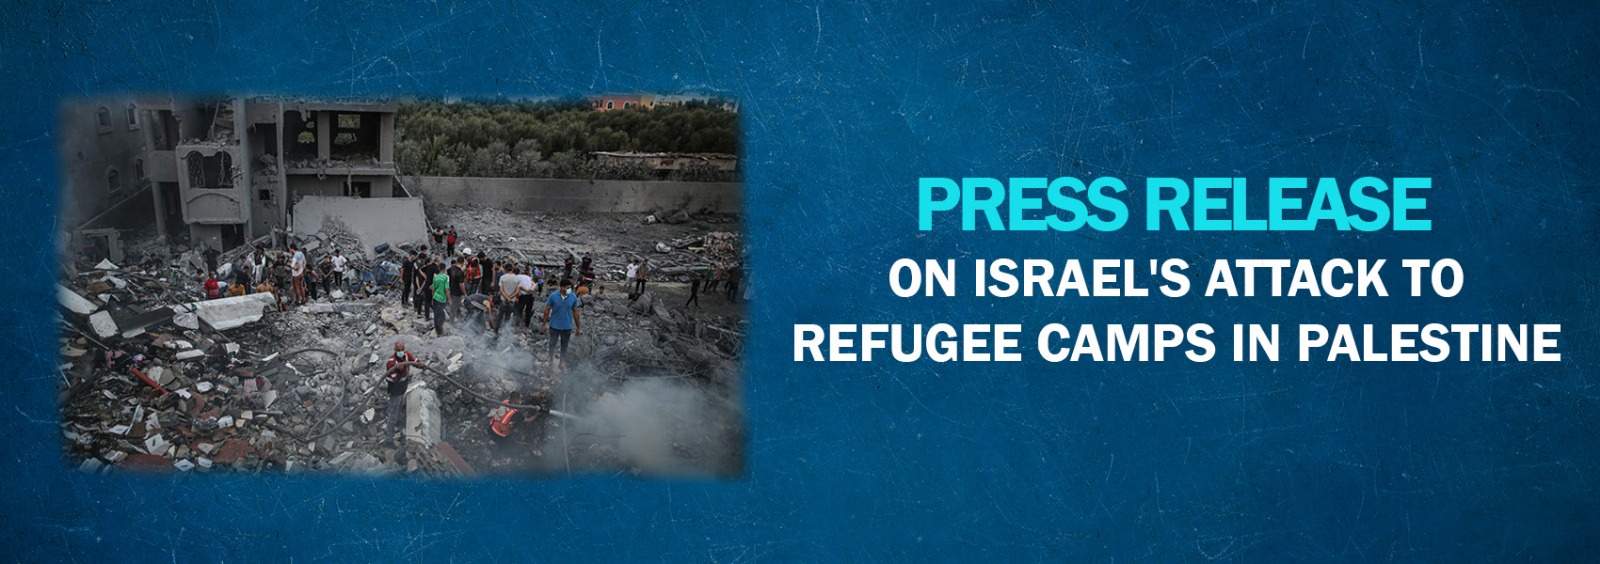 Press Release on Israel's Attack to Refugee Camps in Palestine